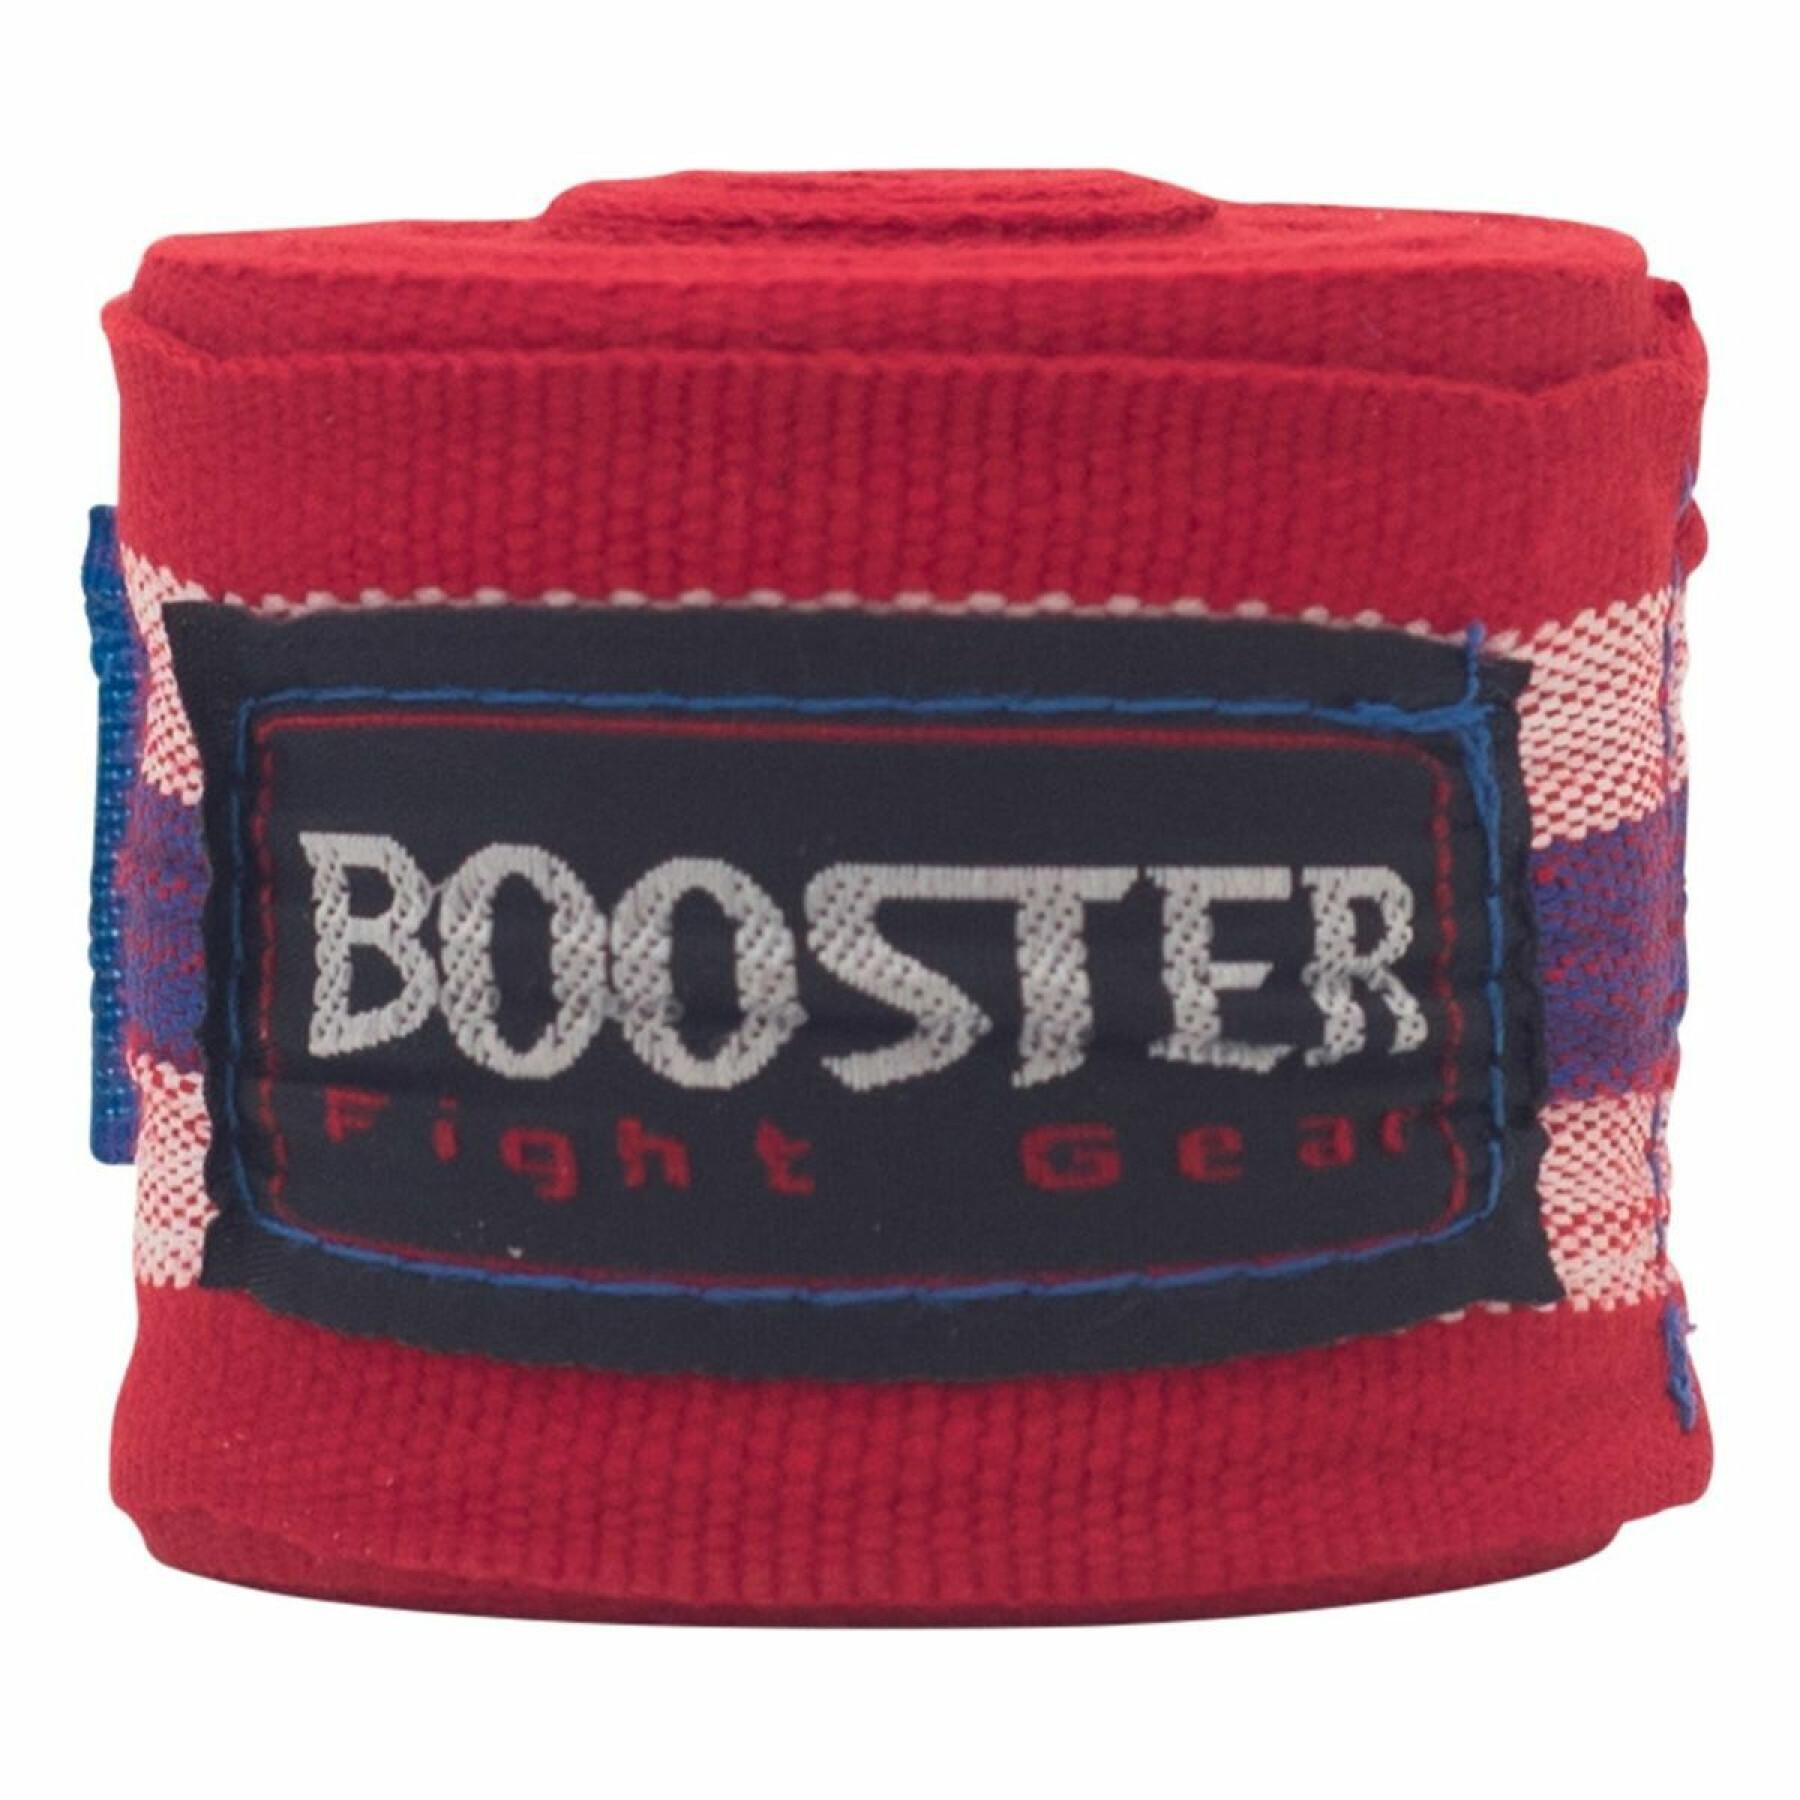 Boxing Bands Booster Fight Gear Bpc Thai